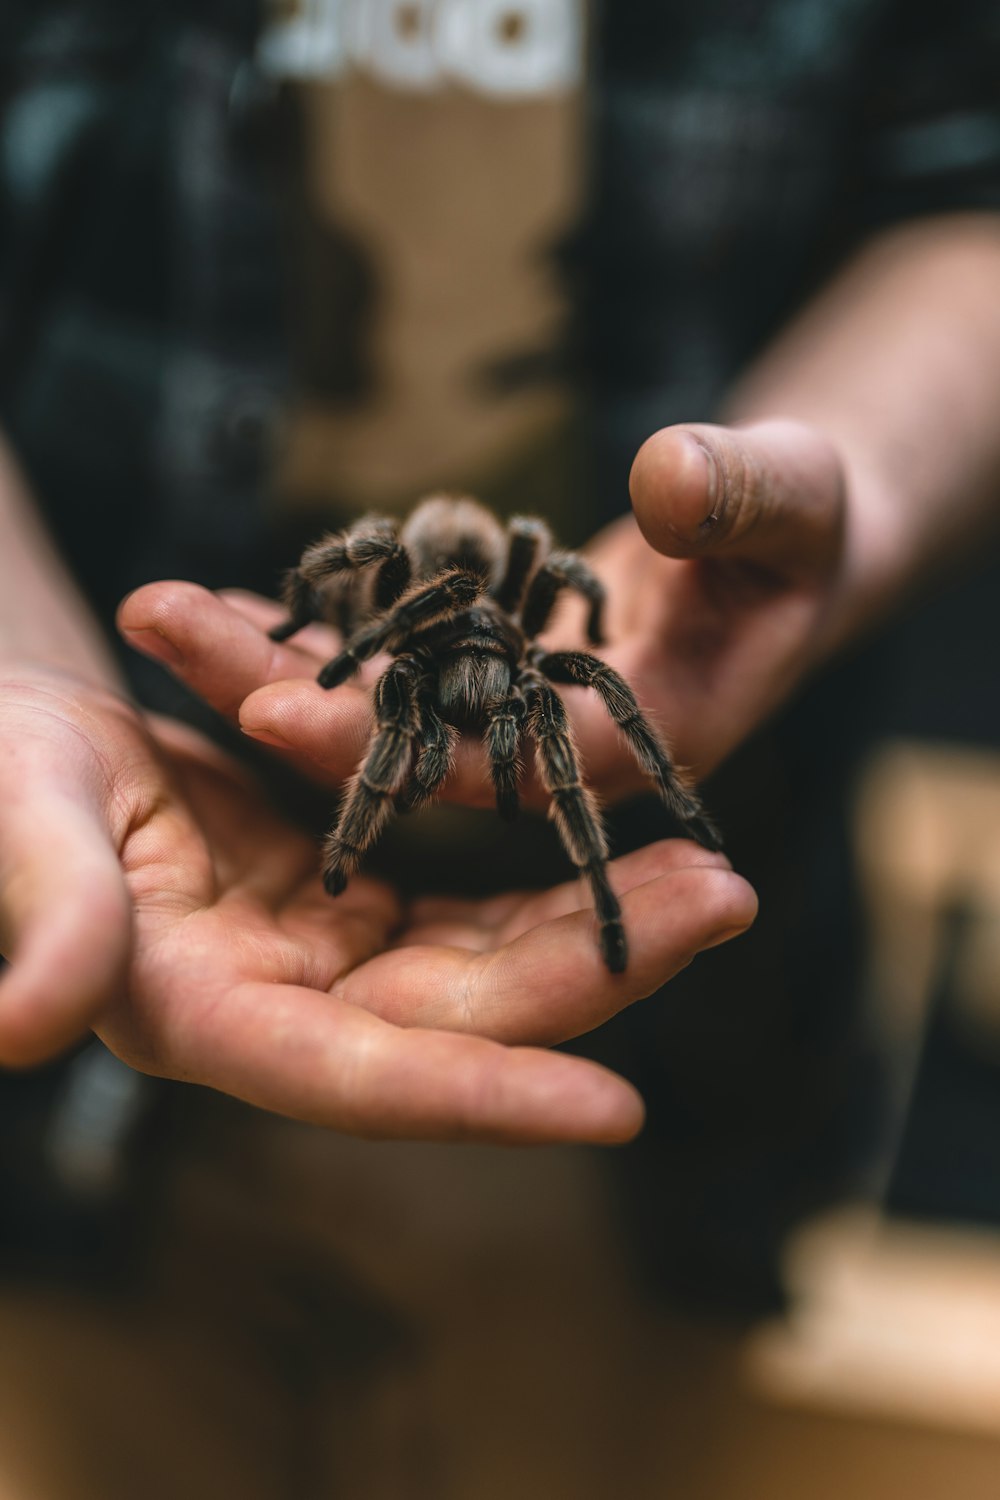 a person holding a spider in their hands